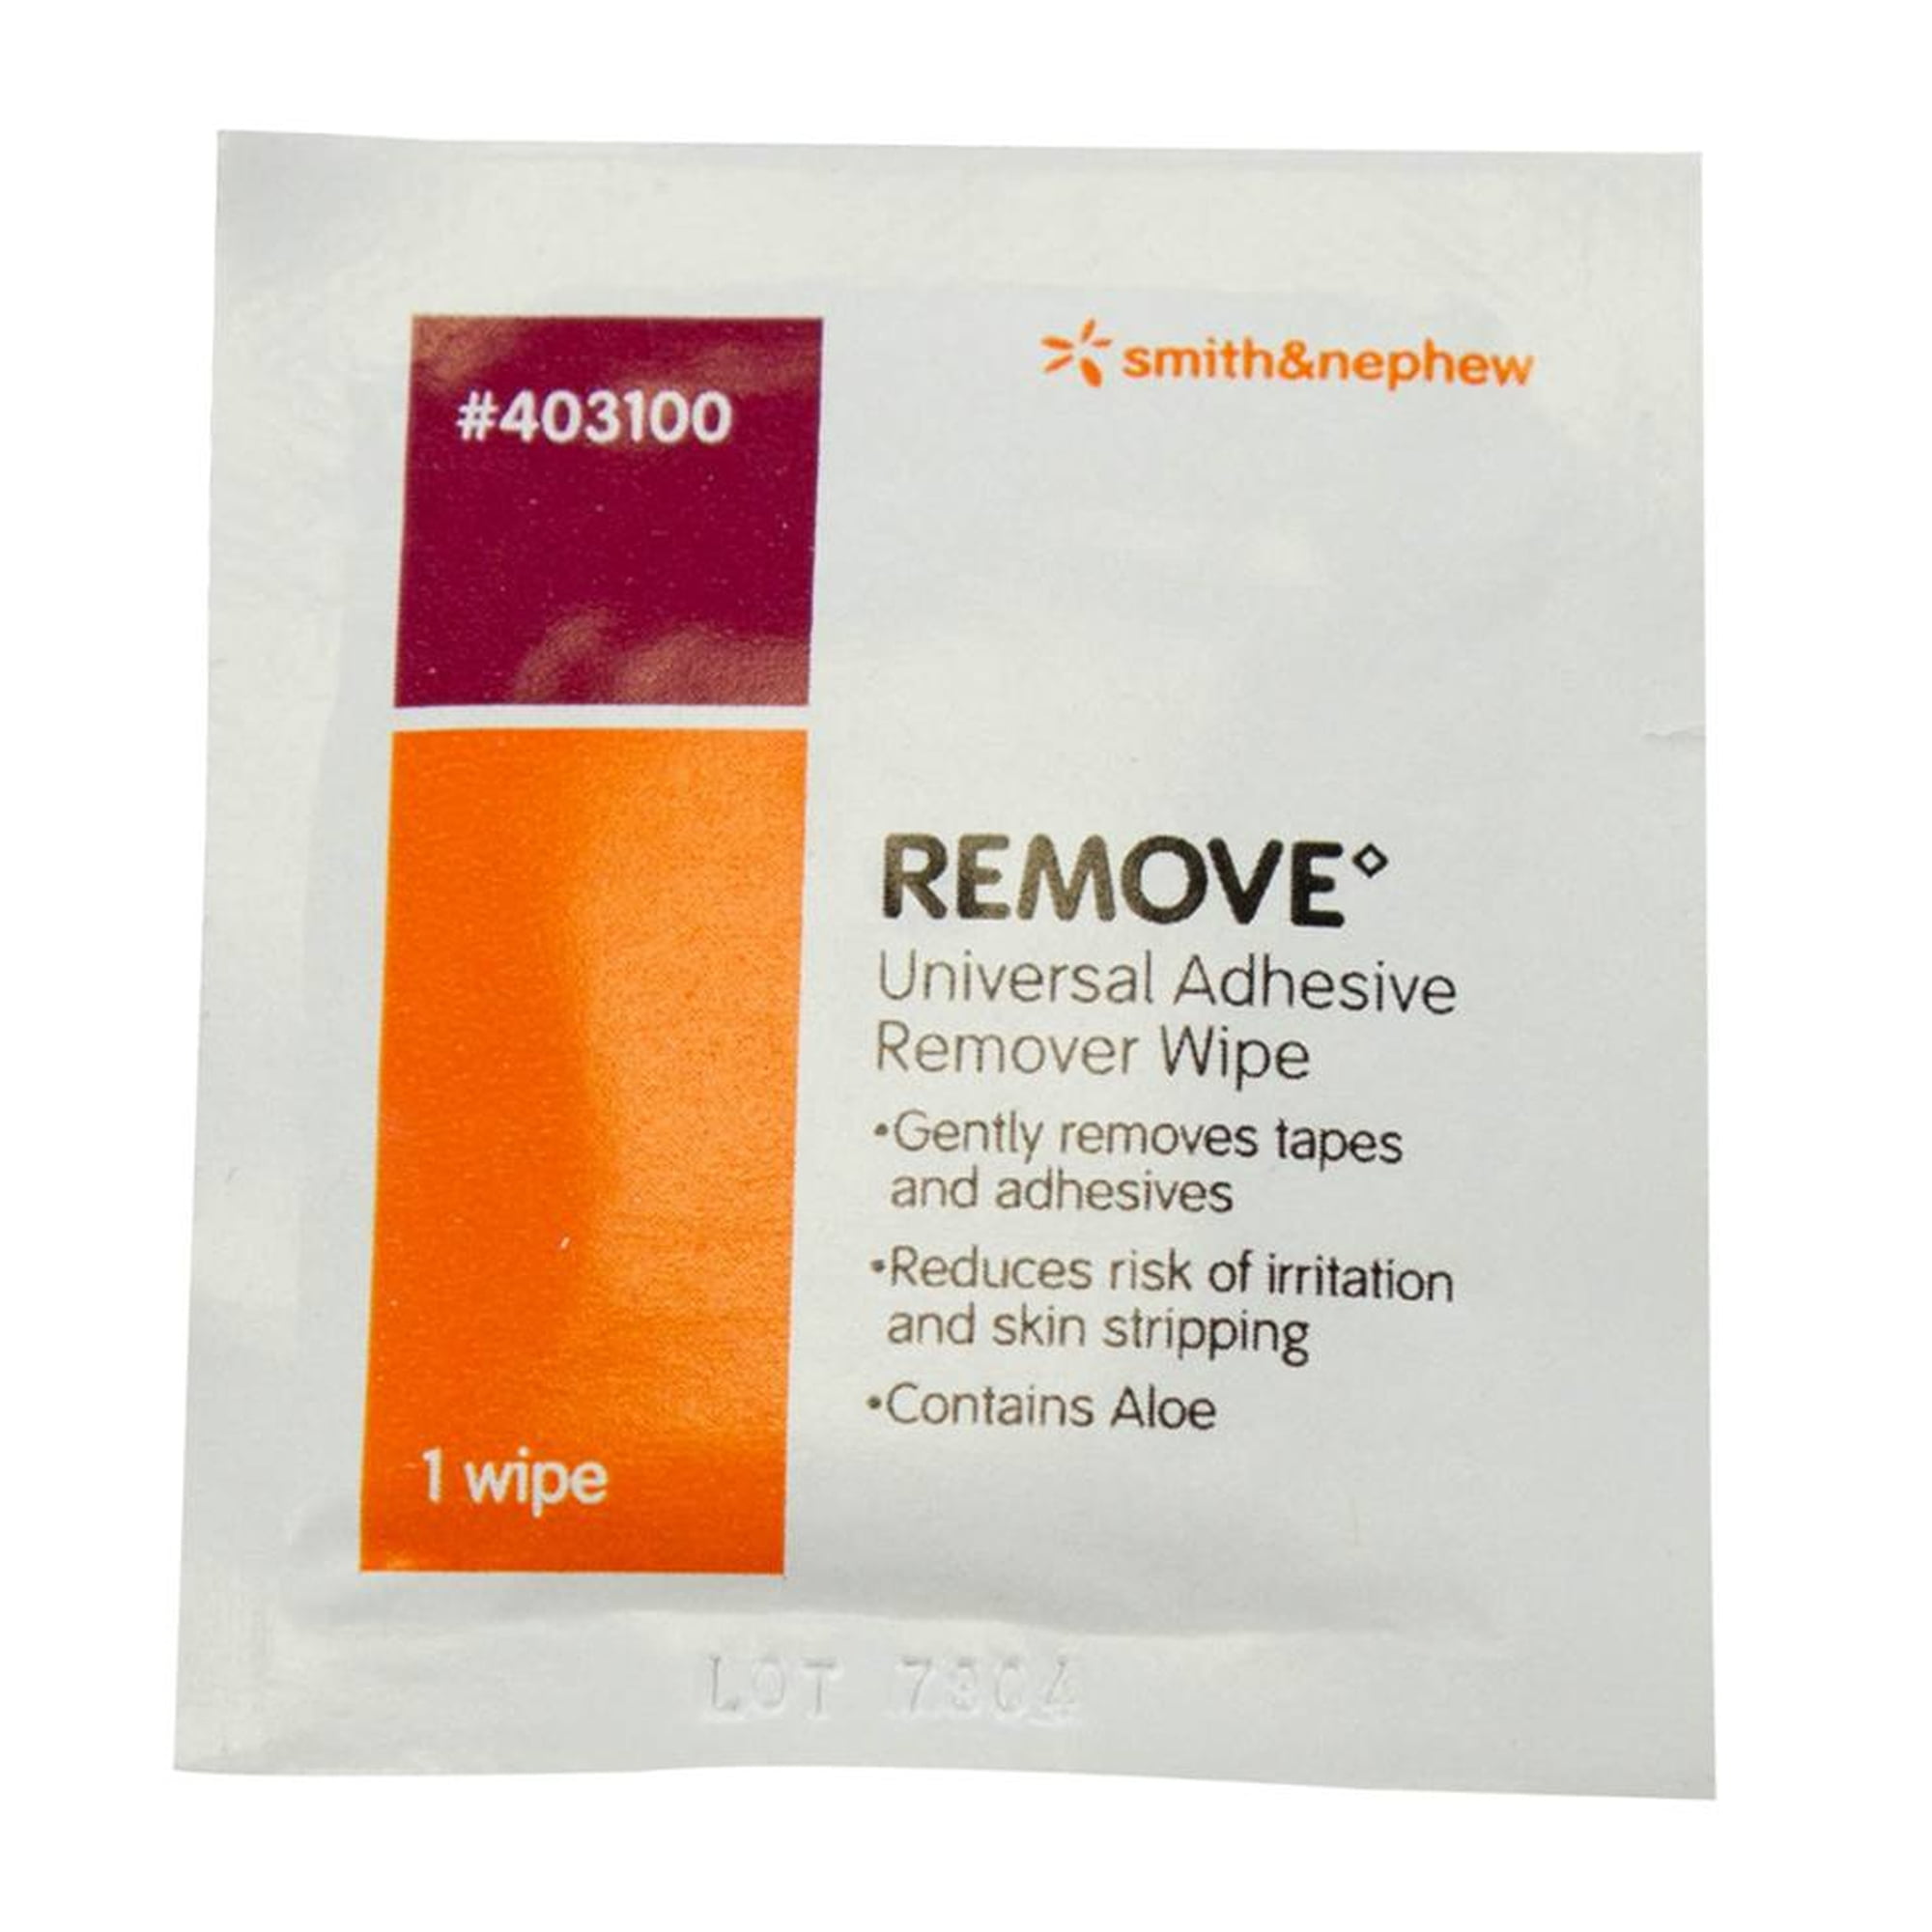 Uni-Solve Adhesive Remover Wipes Wpe 50 Wholesale Supplier 🛍️- Smith &  Nephew OTC Superstore